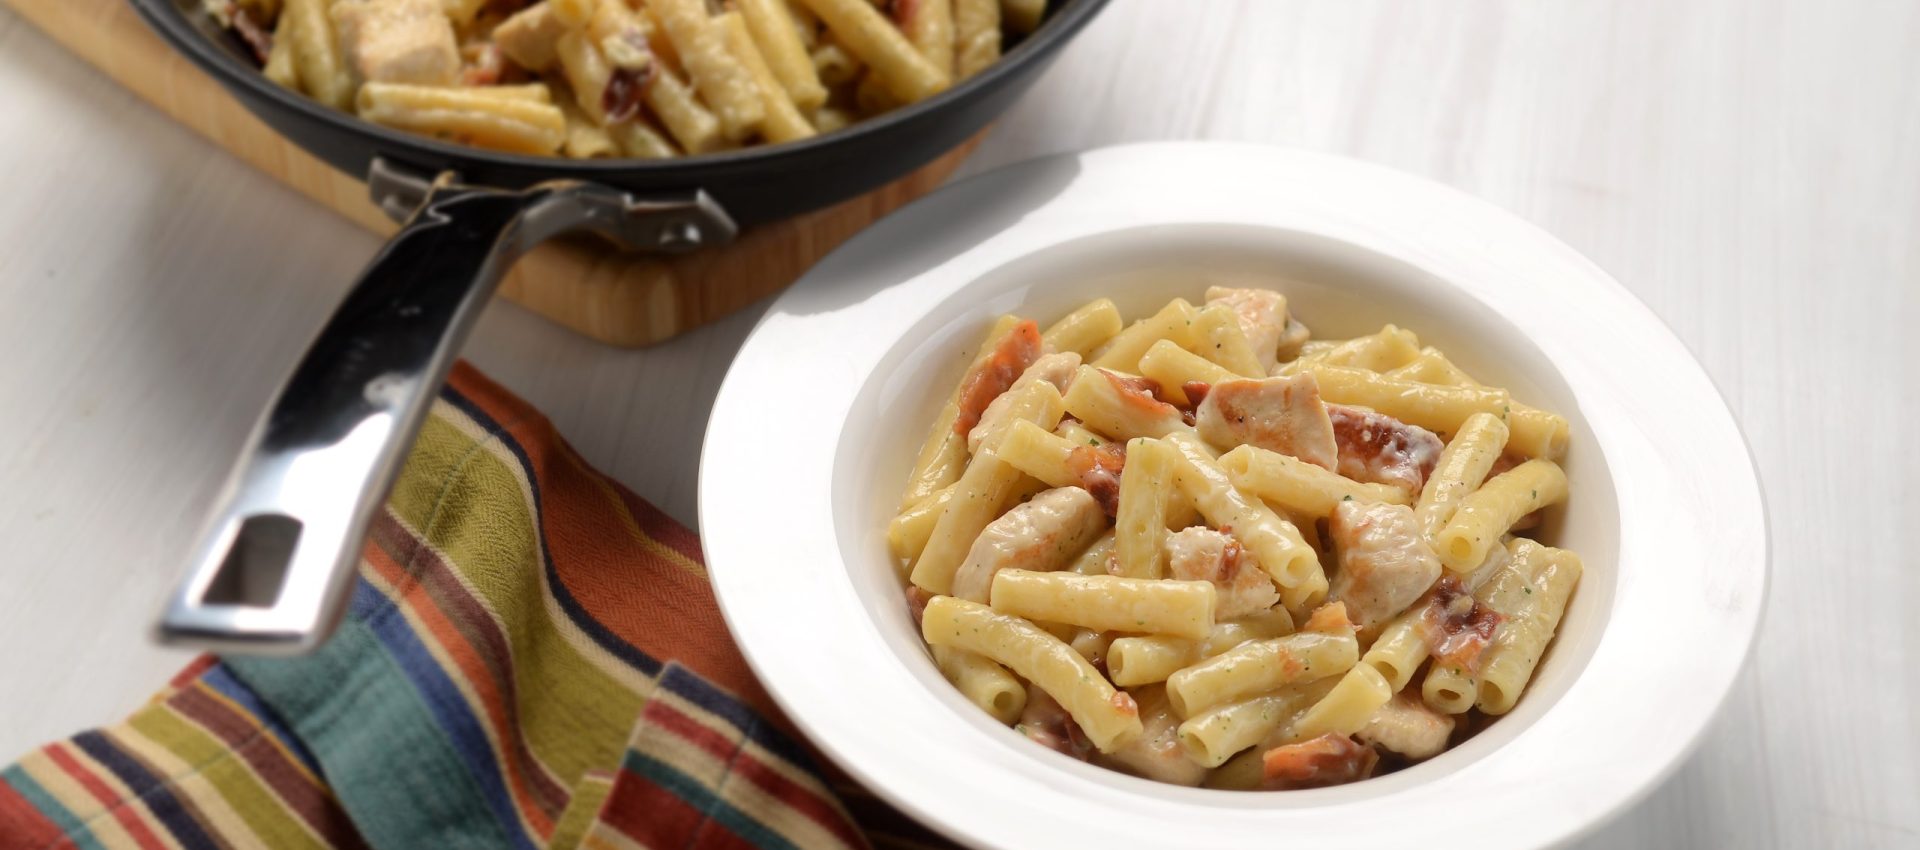 Bacon-Ranch-Chicken-Pasta-HR-1-1-scaled-1920x850 Bacon Ranch Chicken and Pasta Skillet